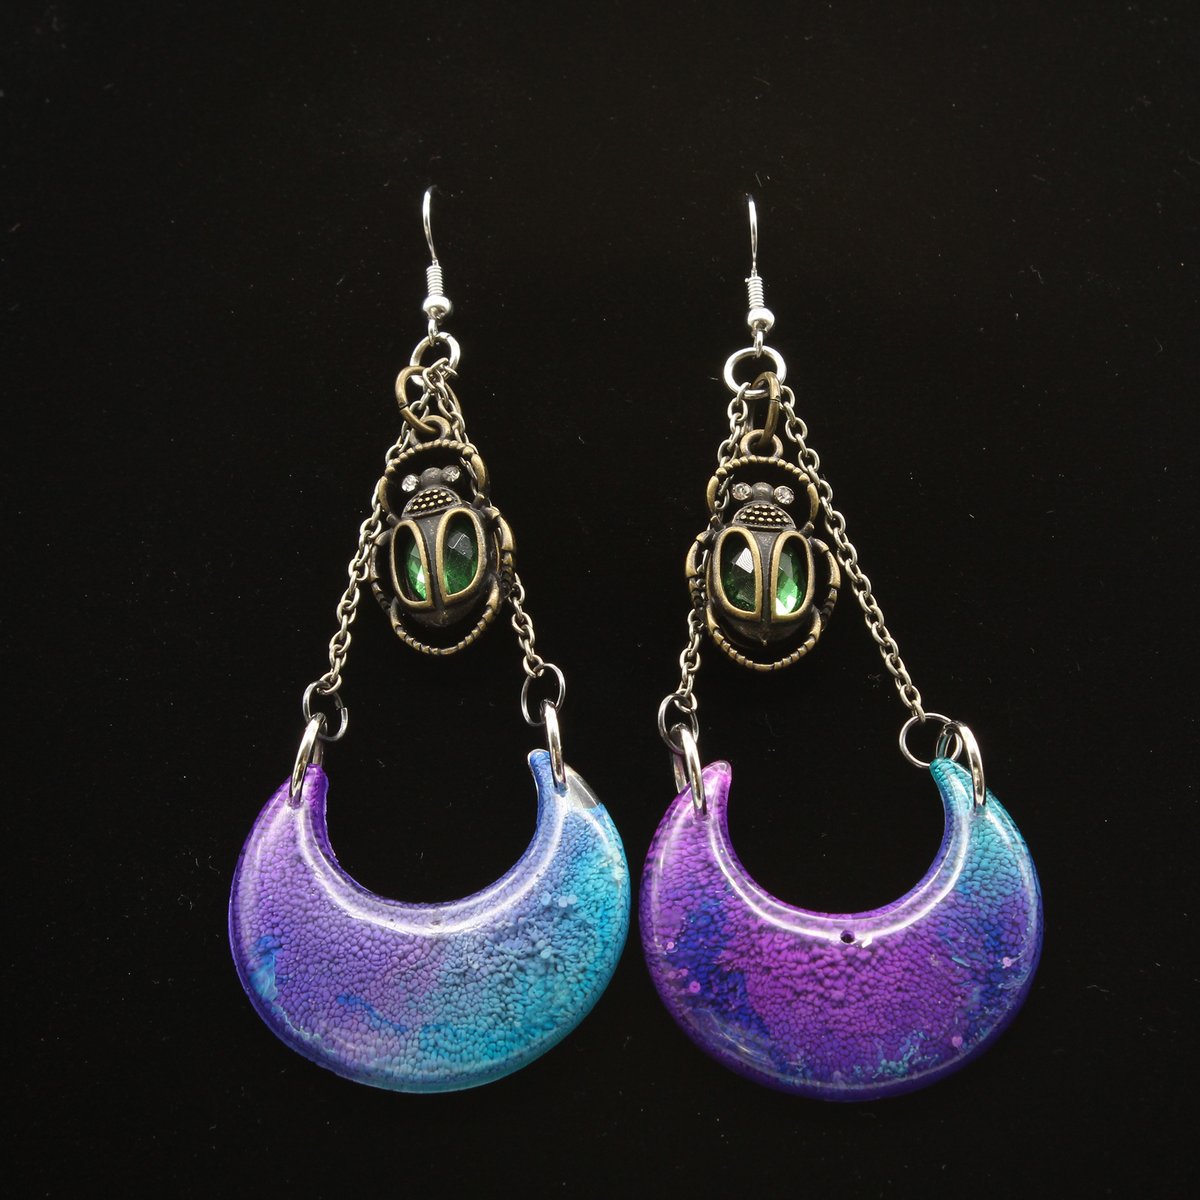 I really love how these earrings came out. I love how the alcohol ink played in the crescent moons. #stargazer #stargazergoods #moonearrings #resin #resinjewelry #resinearrings #alcoholink #purpleearrings #tealearrings #fluidart #oregon #portland #portlandoregon #PNW #PDX